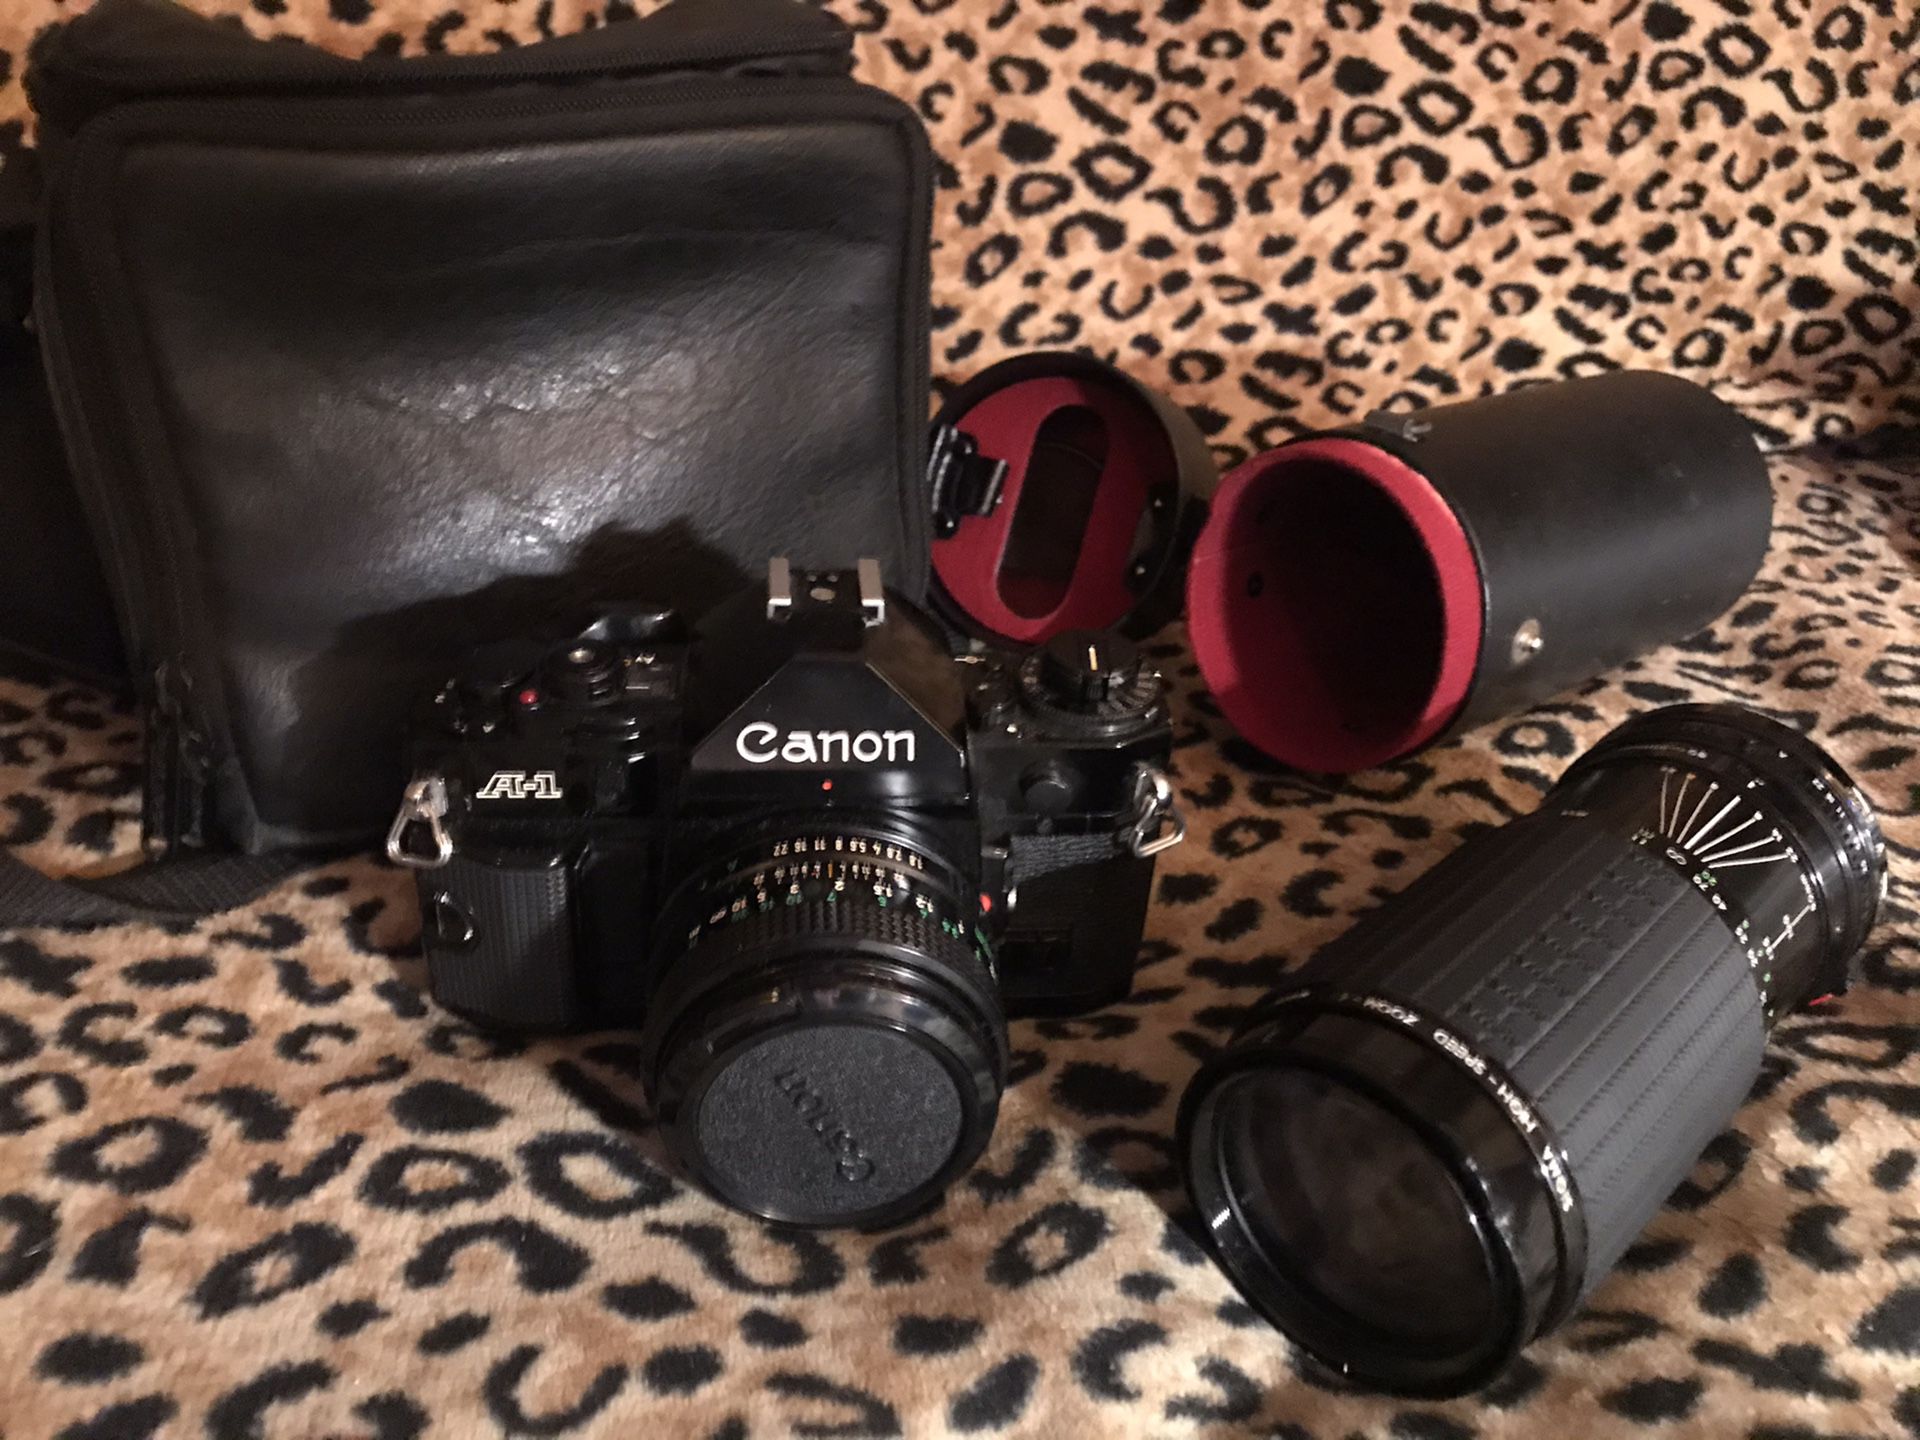 Canon A1 Professional Camera with auto high speed lense, filters and carrying cases